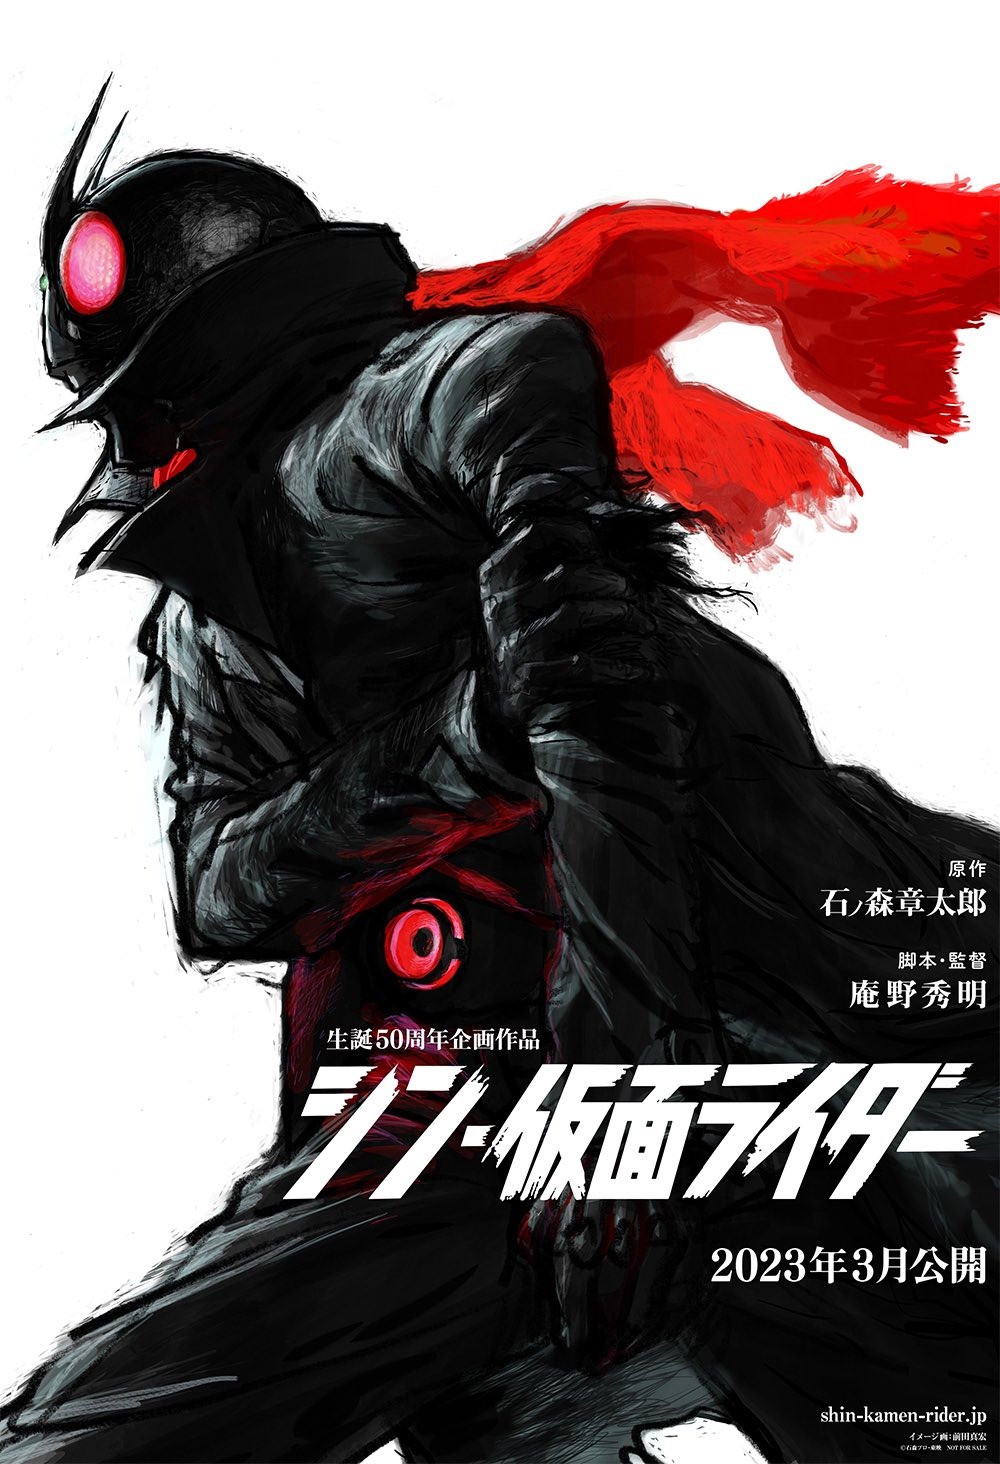 Extra Large Movie Poster Image for Shin Kamen Rider (#3 of 4)